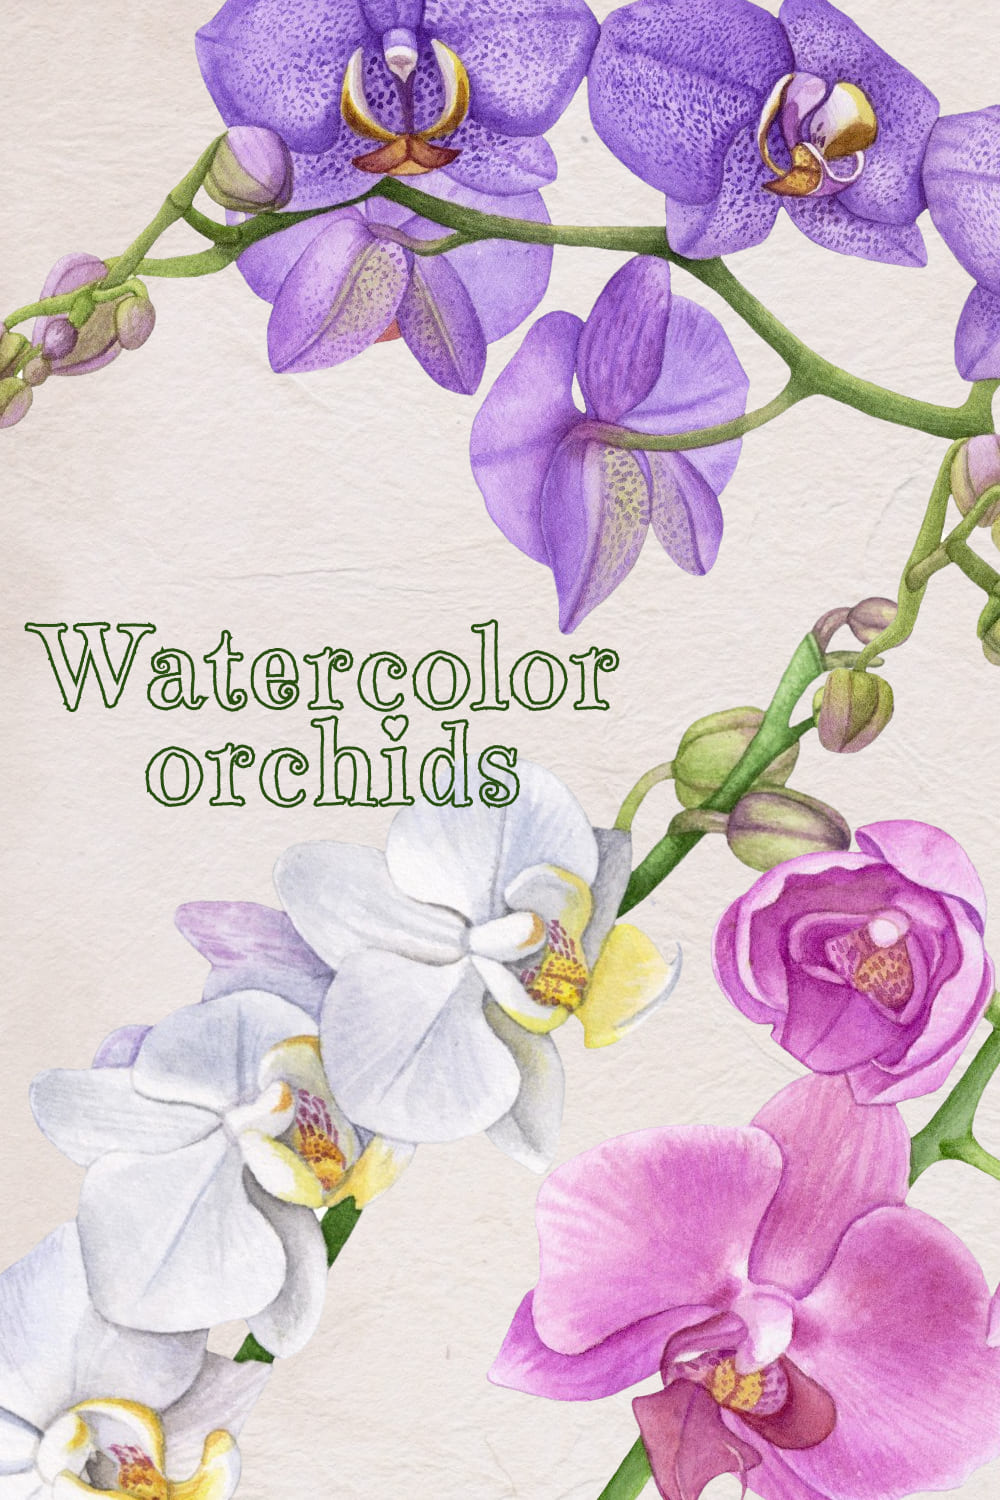 Watercolor Orchids - preview image.